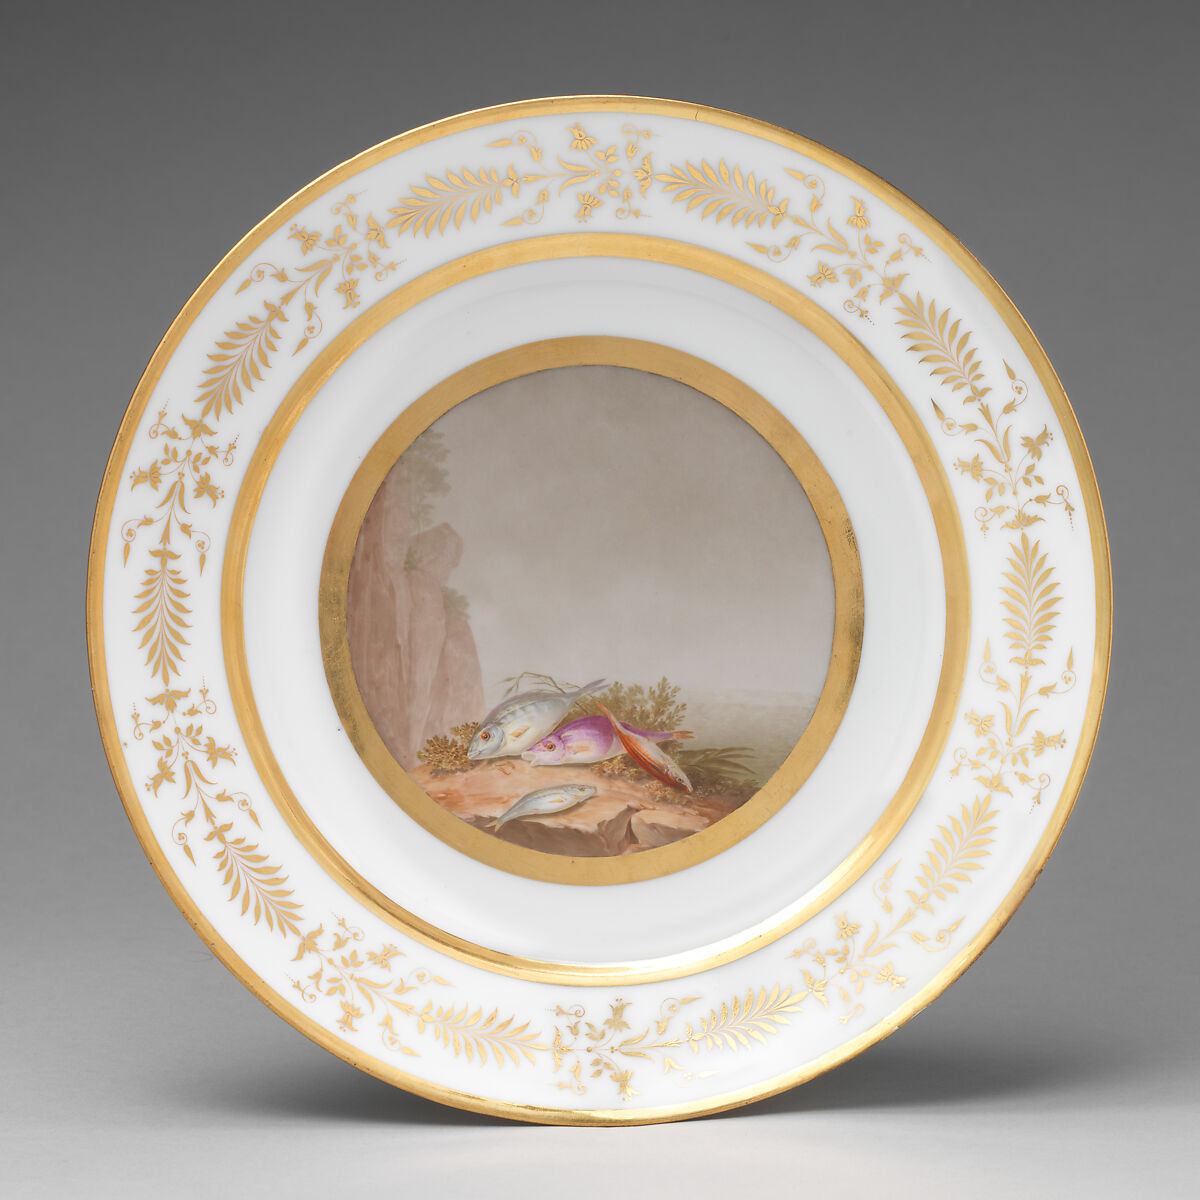 Plate with marine subject, Dihl et Guérhard (French, 1781–ca. 1824), Porcelain, French, Paris 